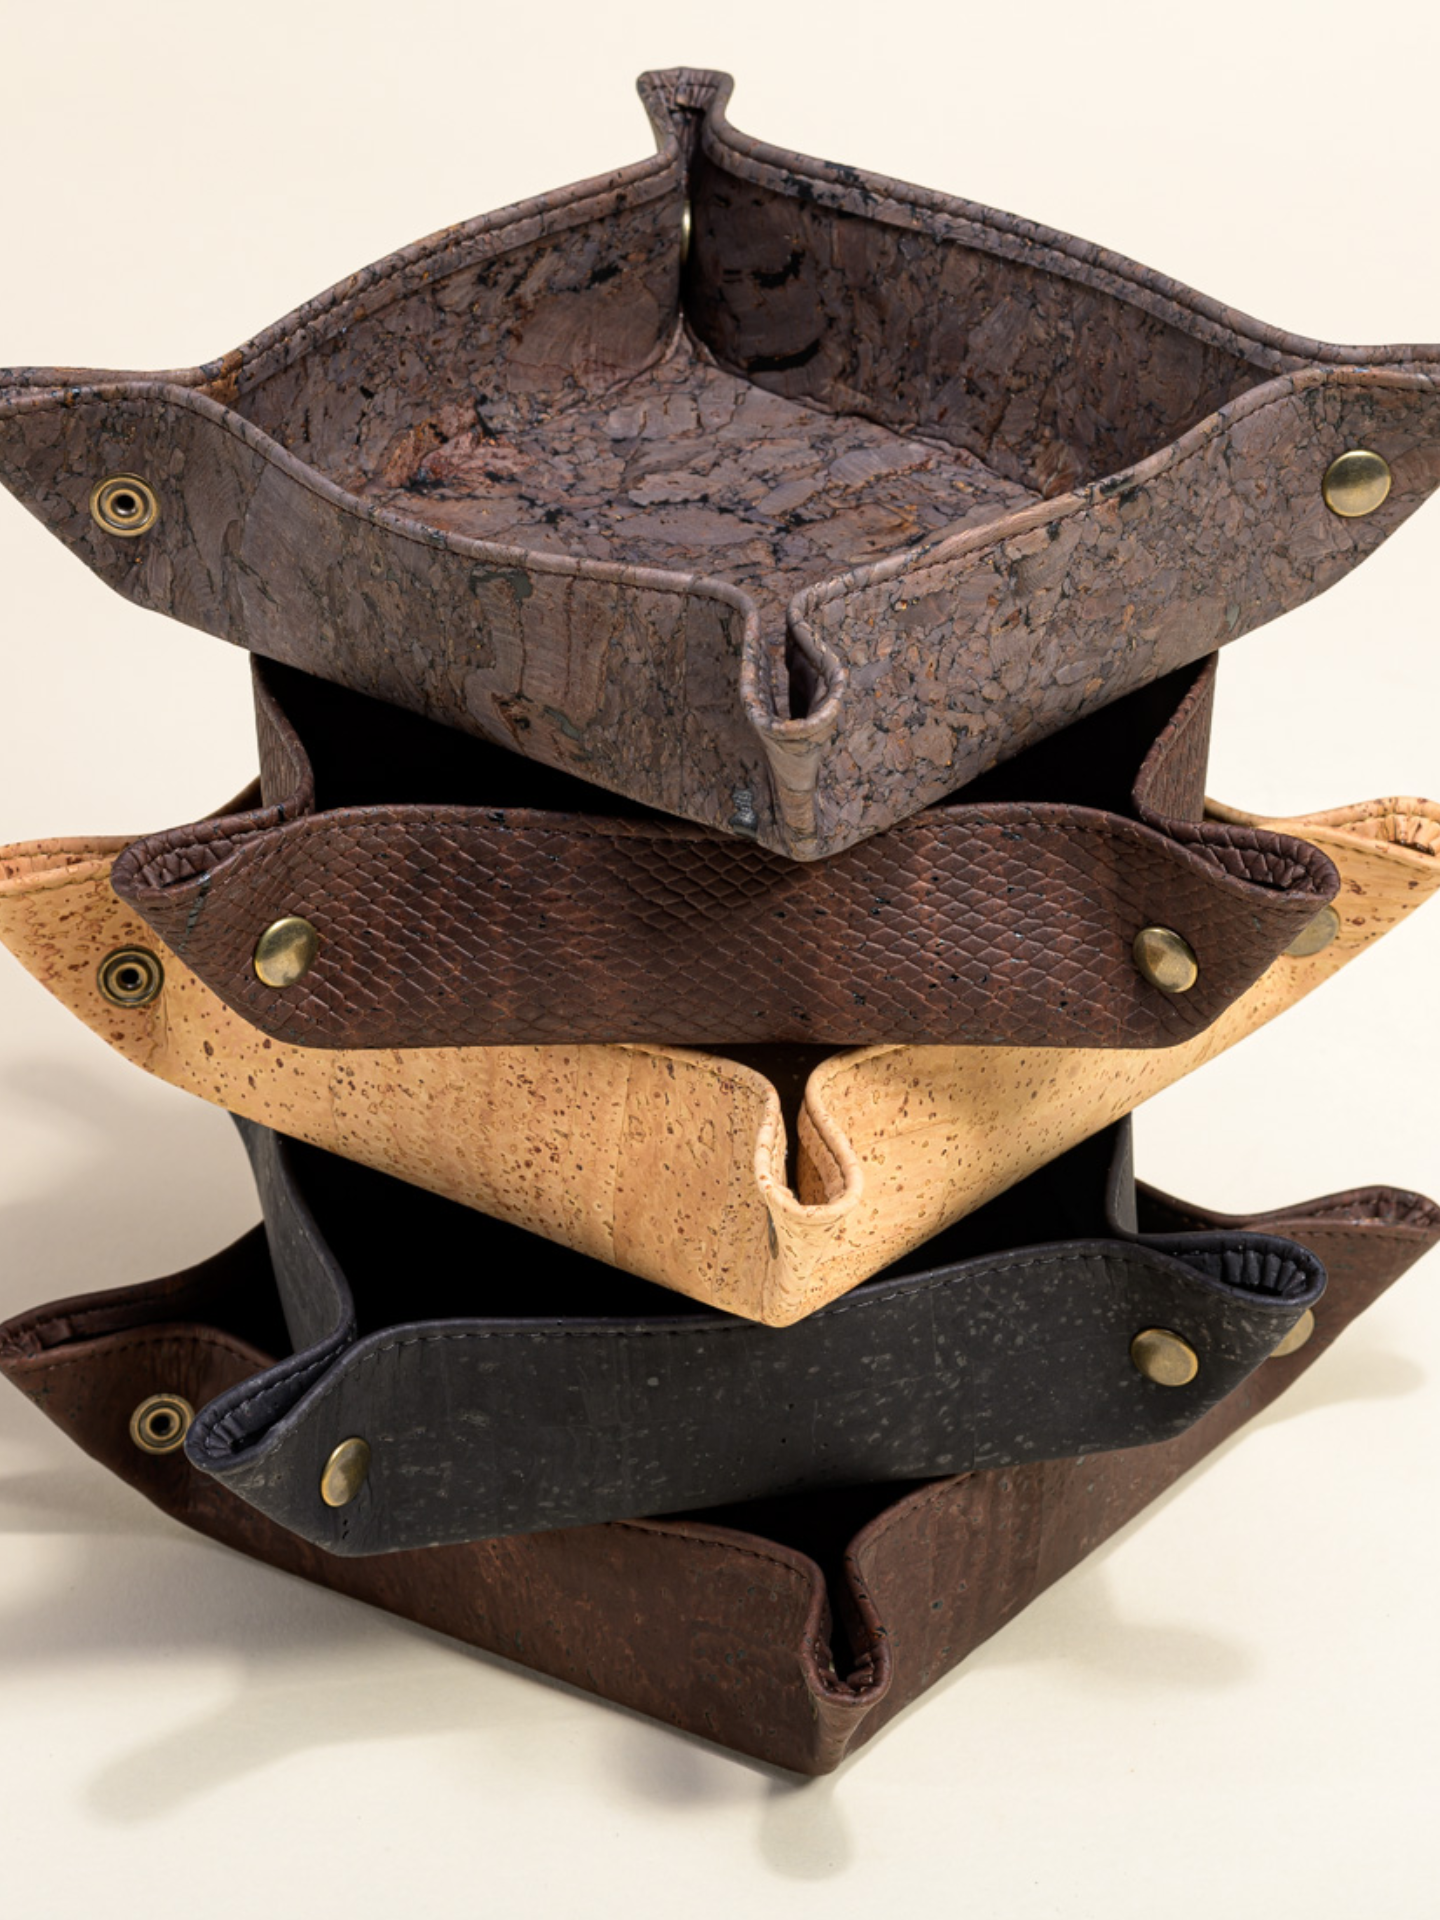 Handcrafted Leather Catch-All Tray for Home or Office Storage and  Organization